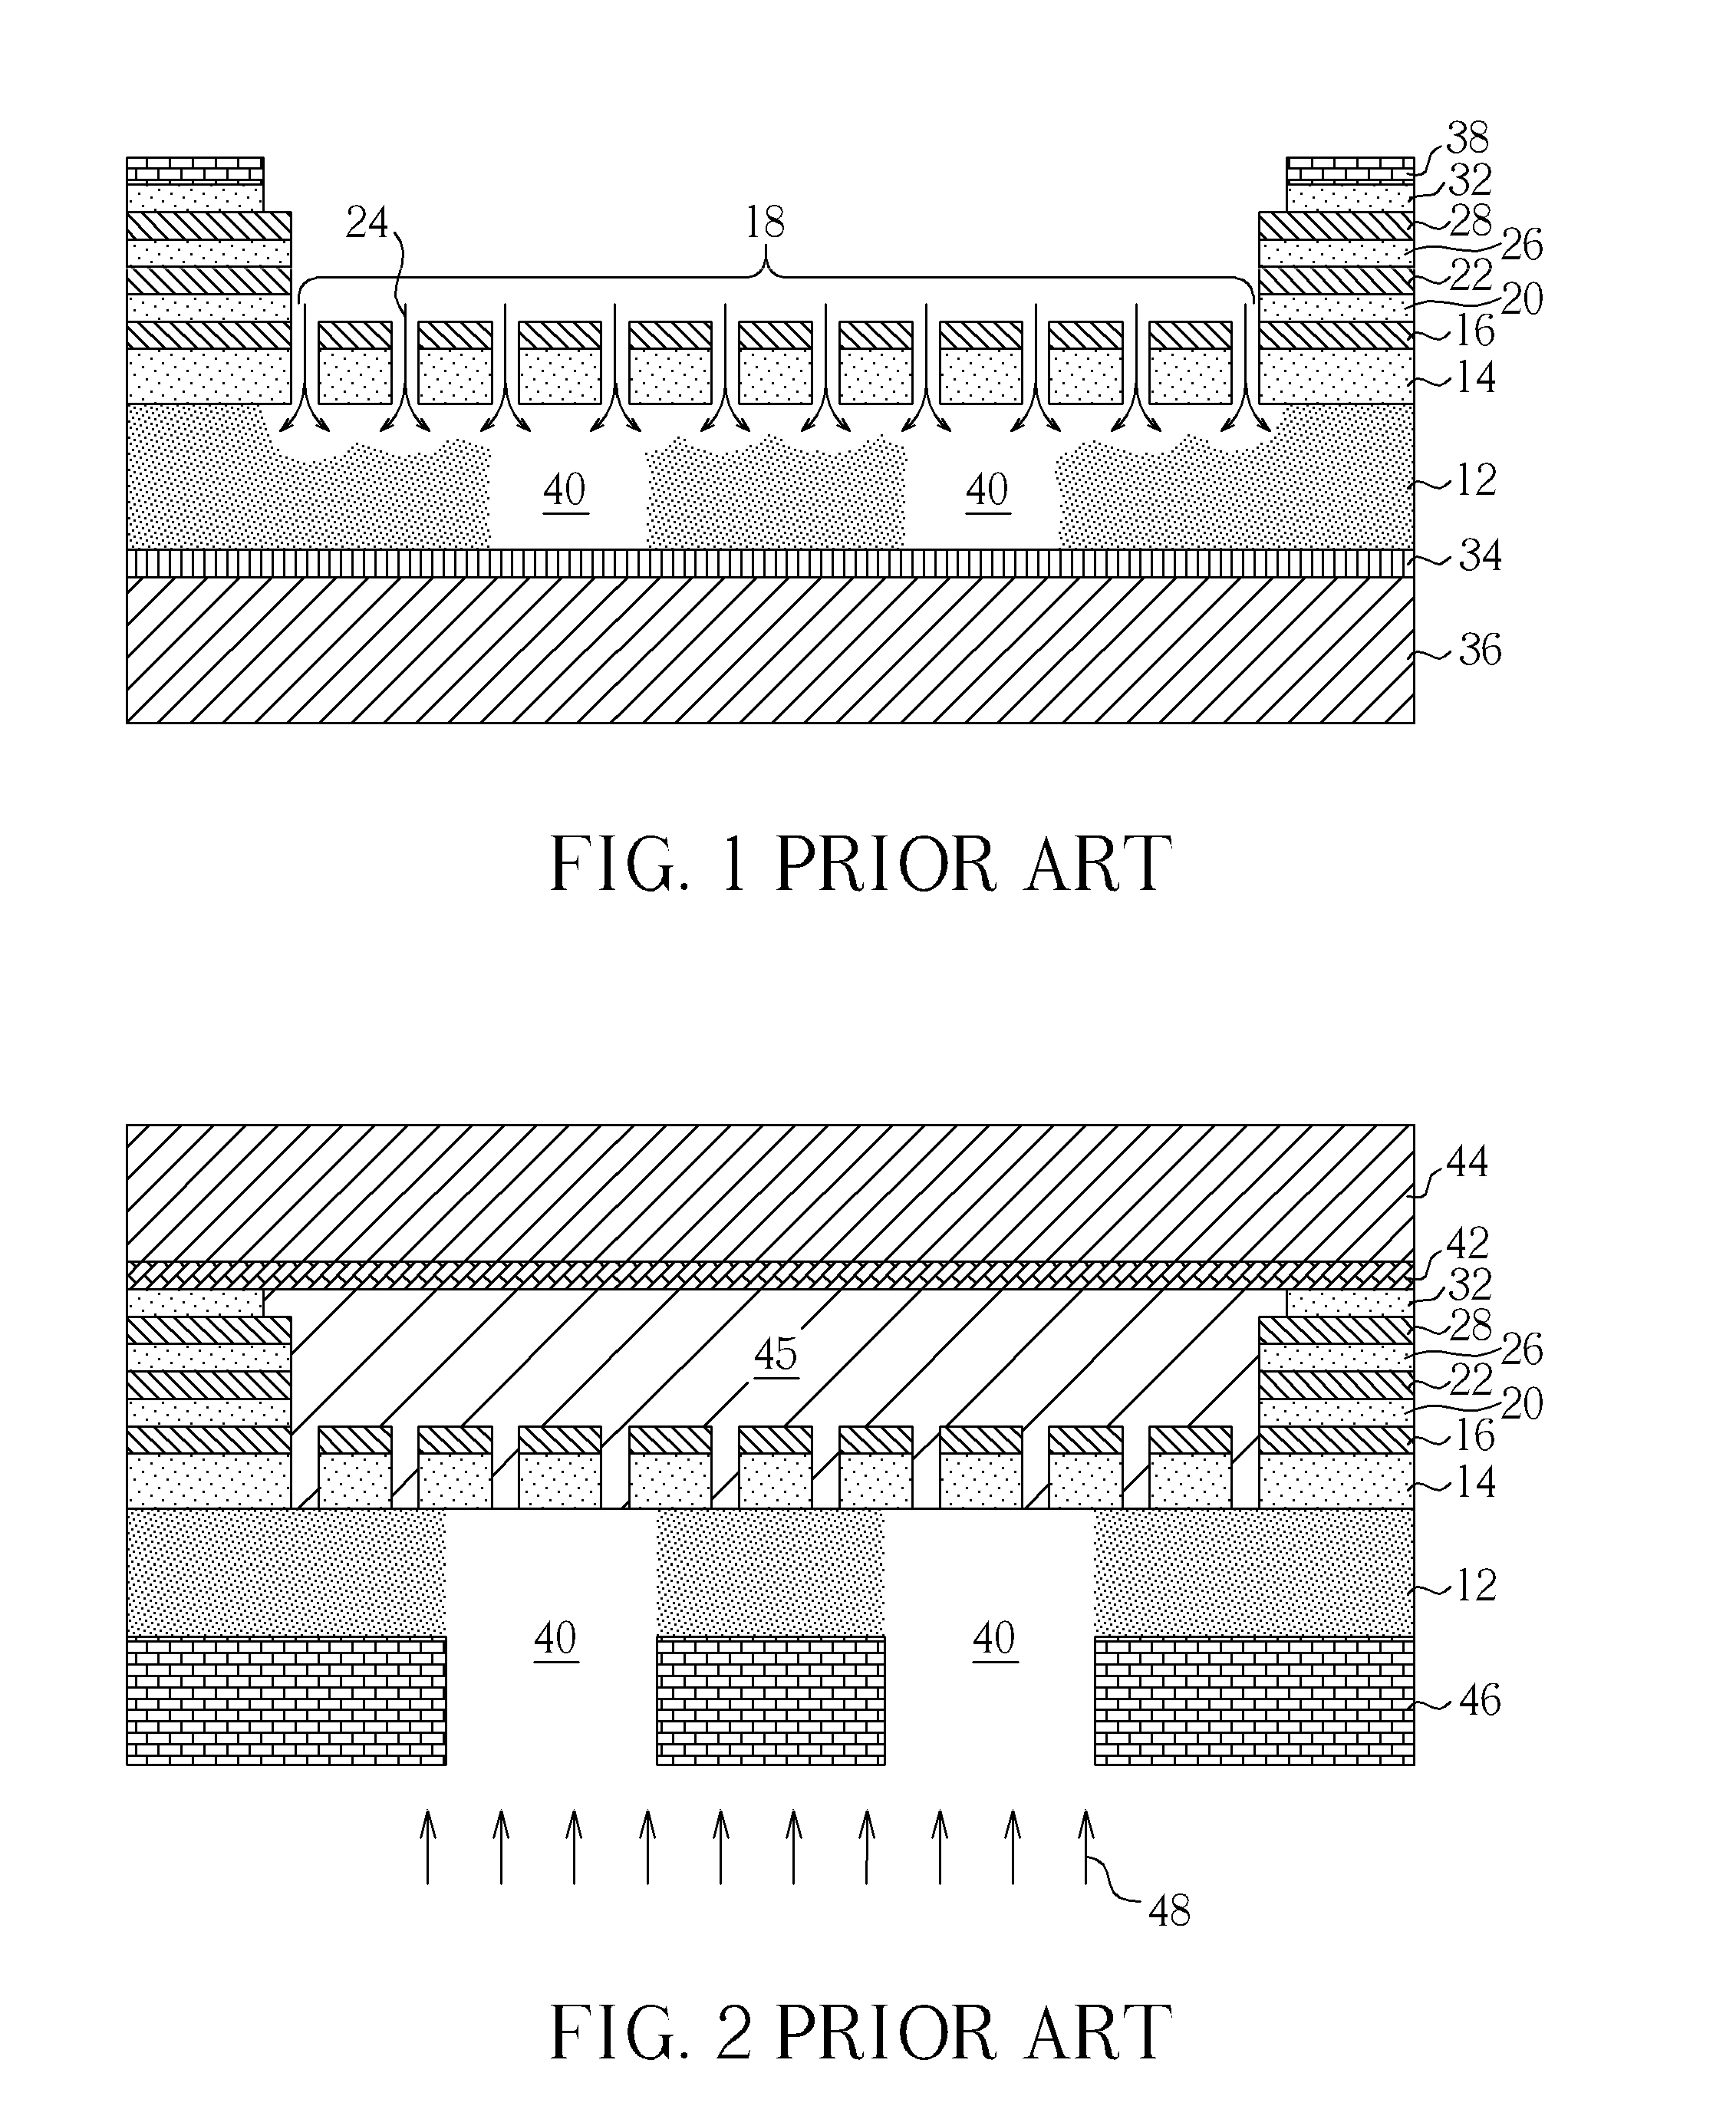 MEMS device and method of making the same